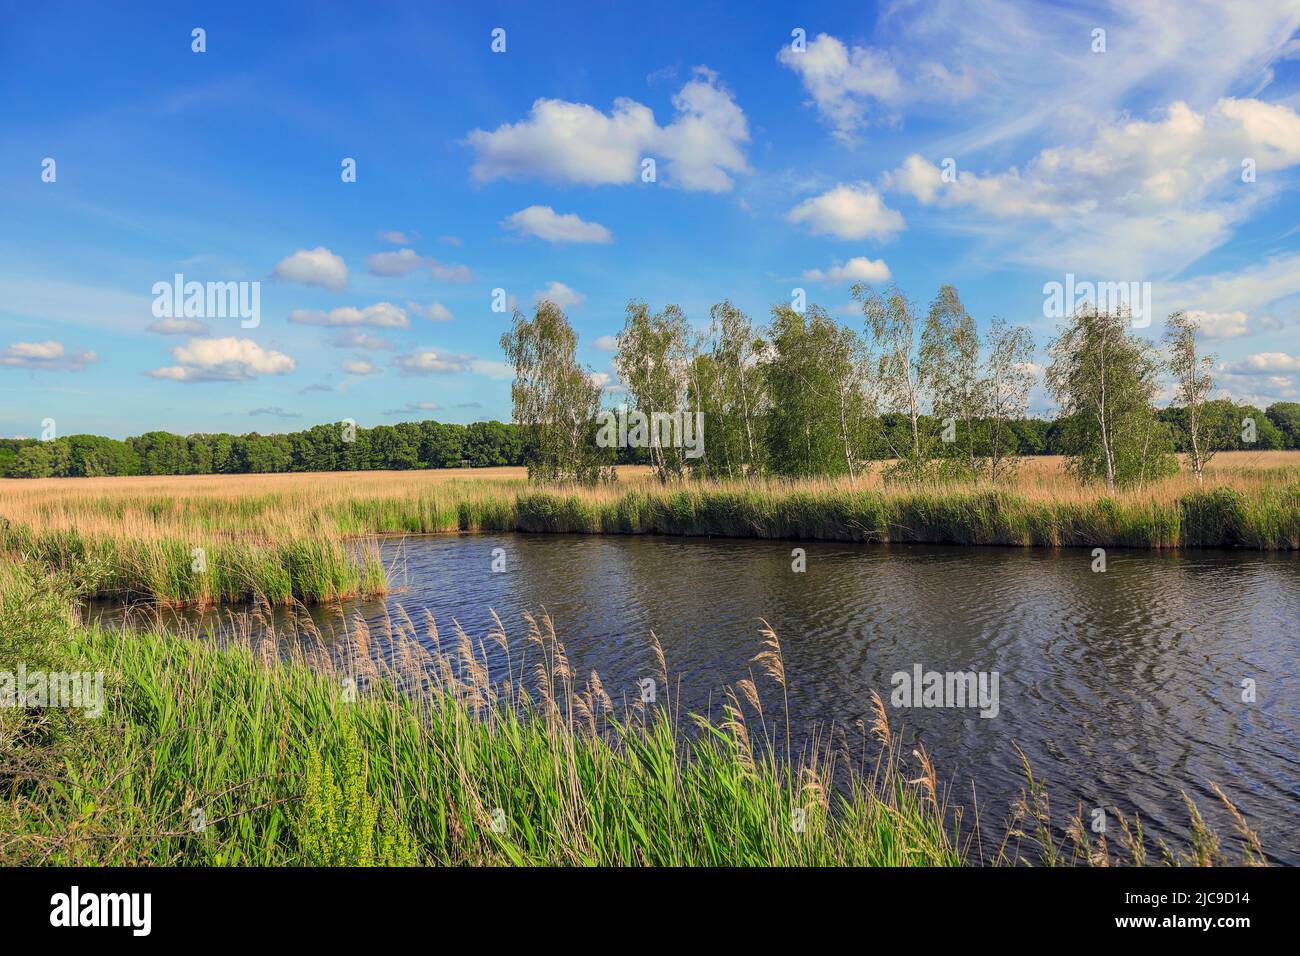 Several lagoons and birch trees are located in the Lübeck - Schellhorn nature reserve in northern Germany. Stock Photo